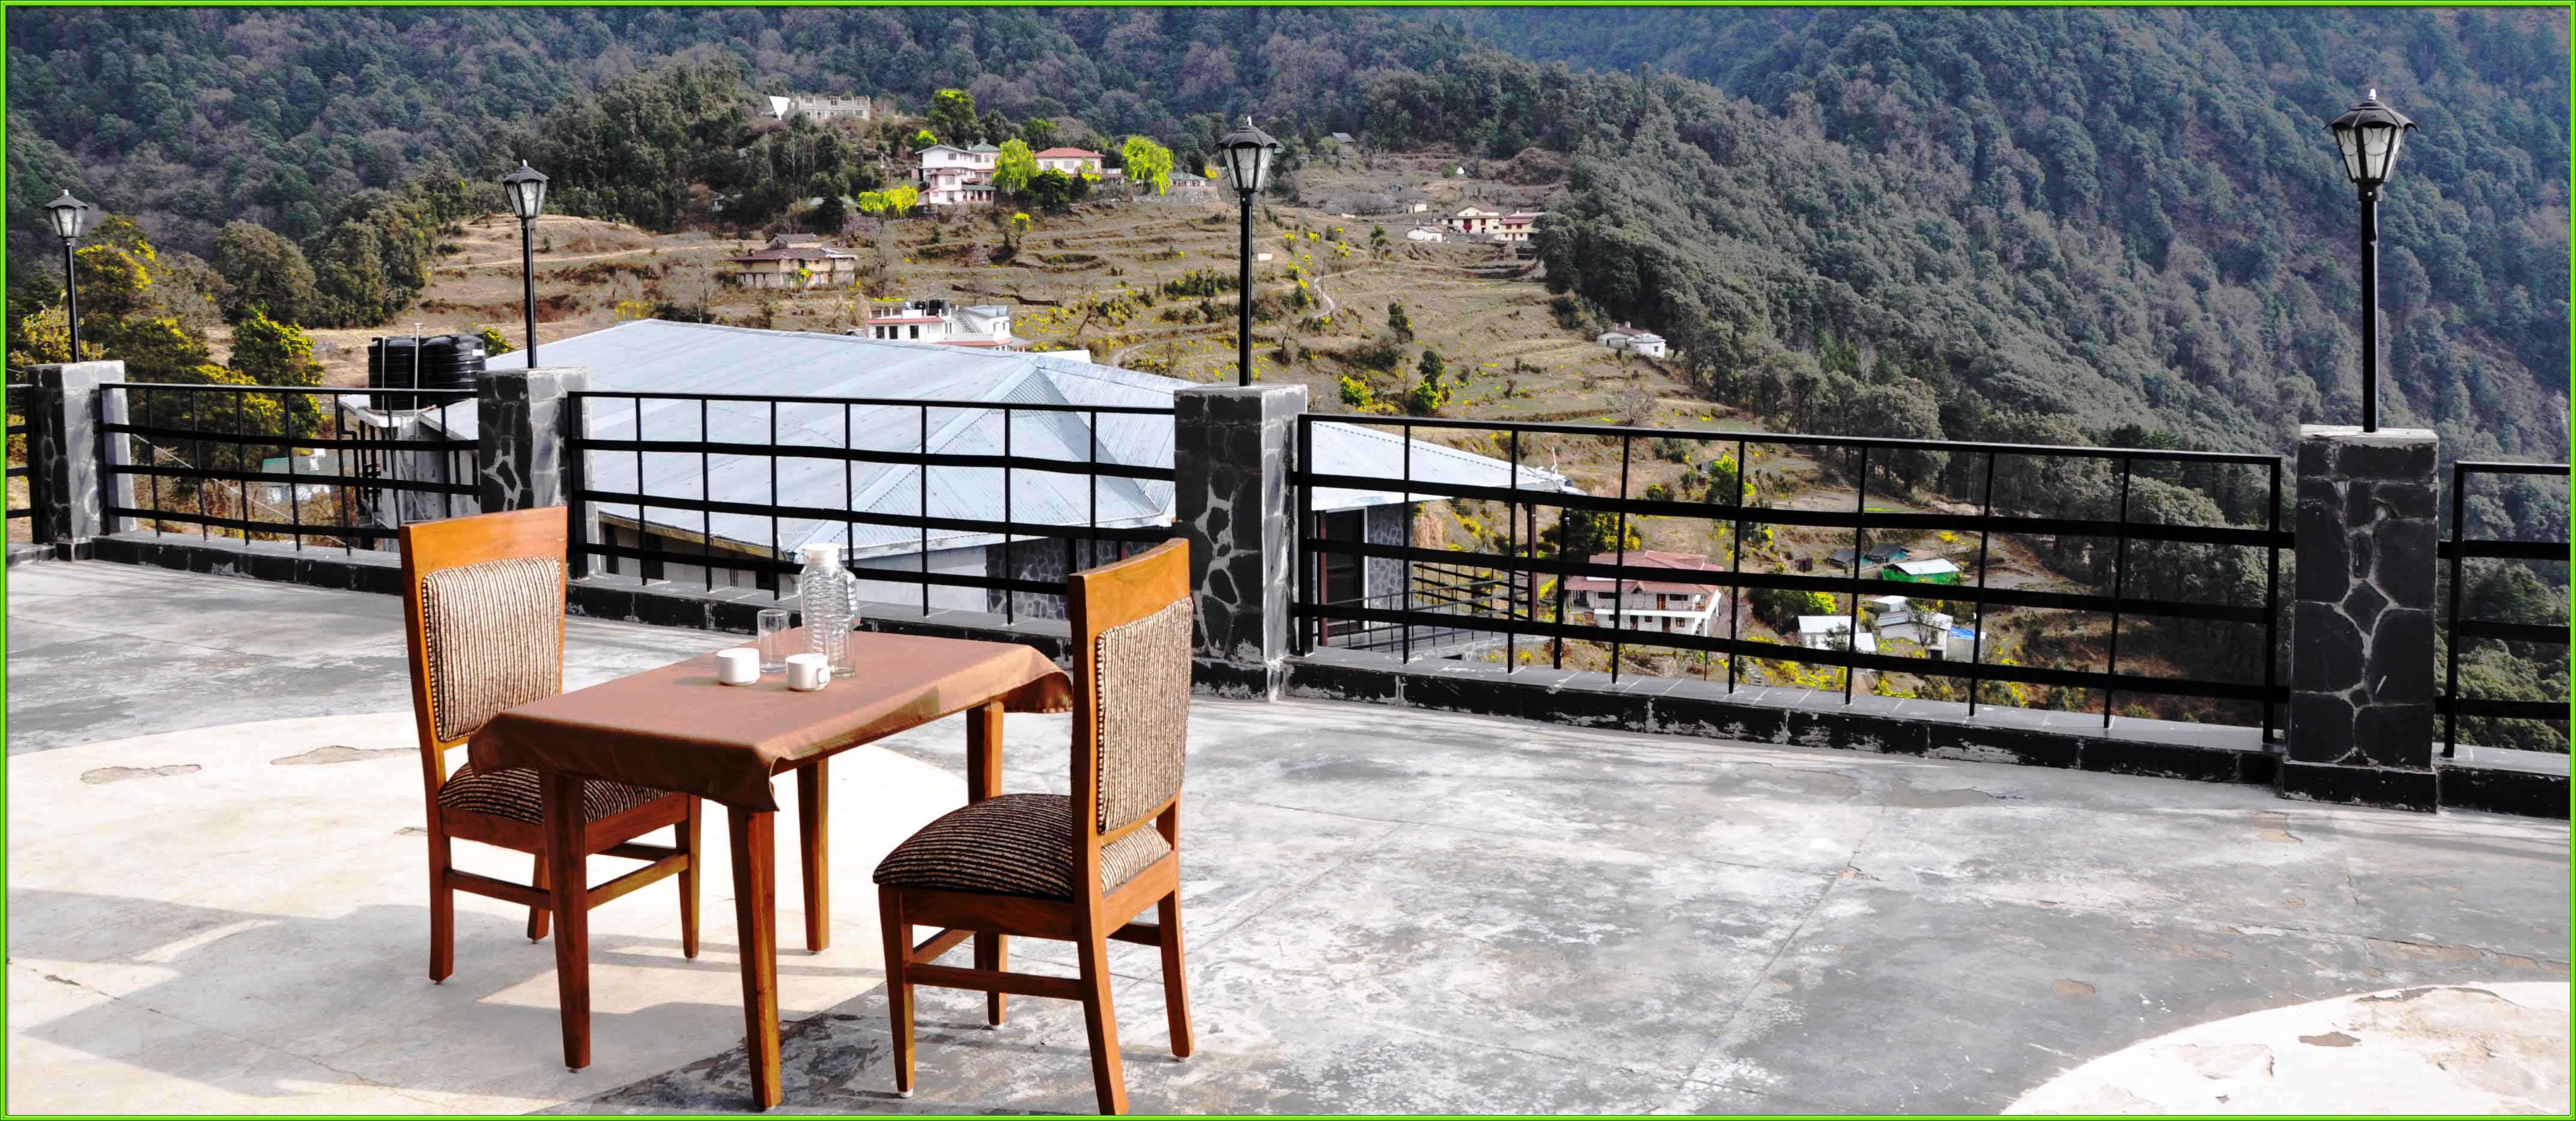 Best Family Resorts in nainital with deluxe and luxury amenities in your pocket budget